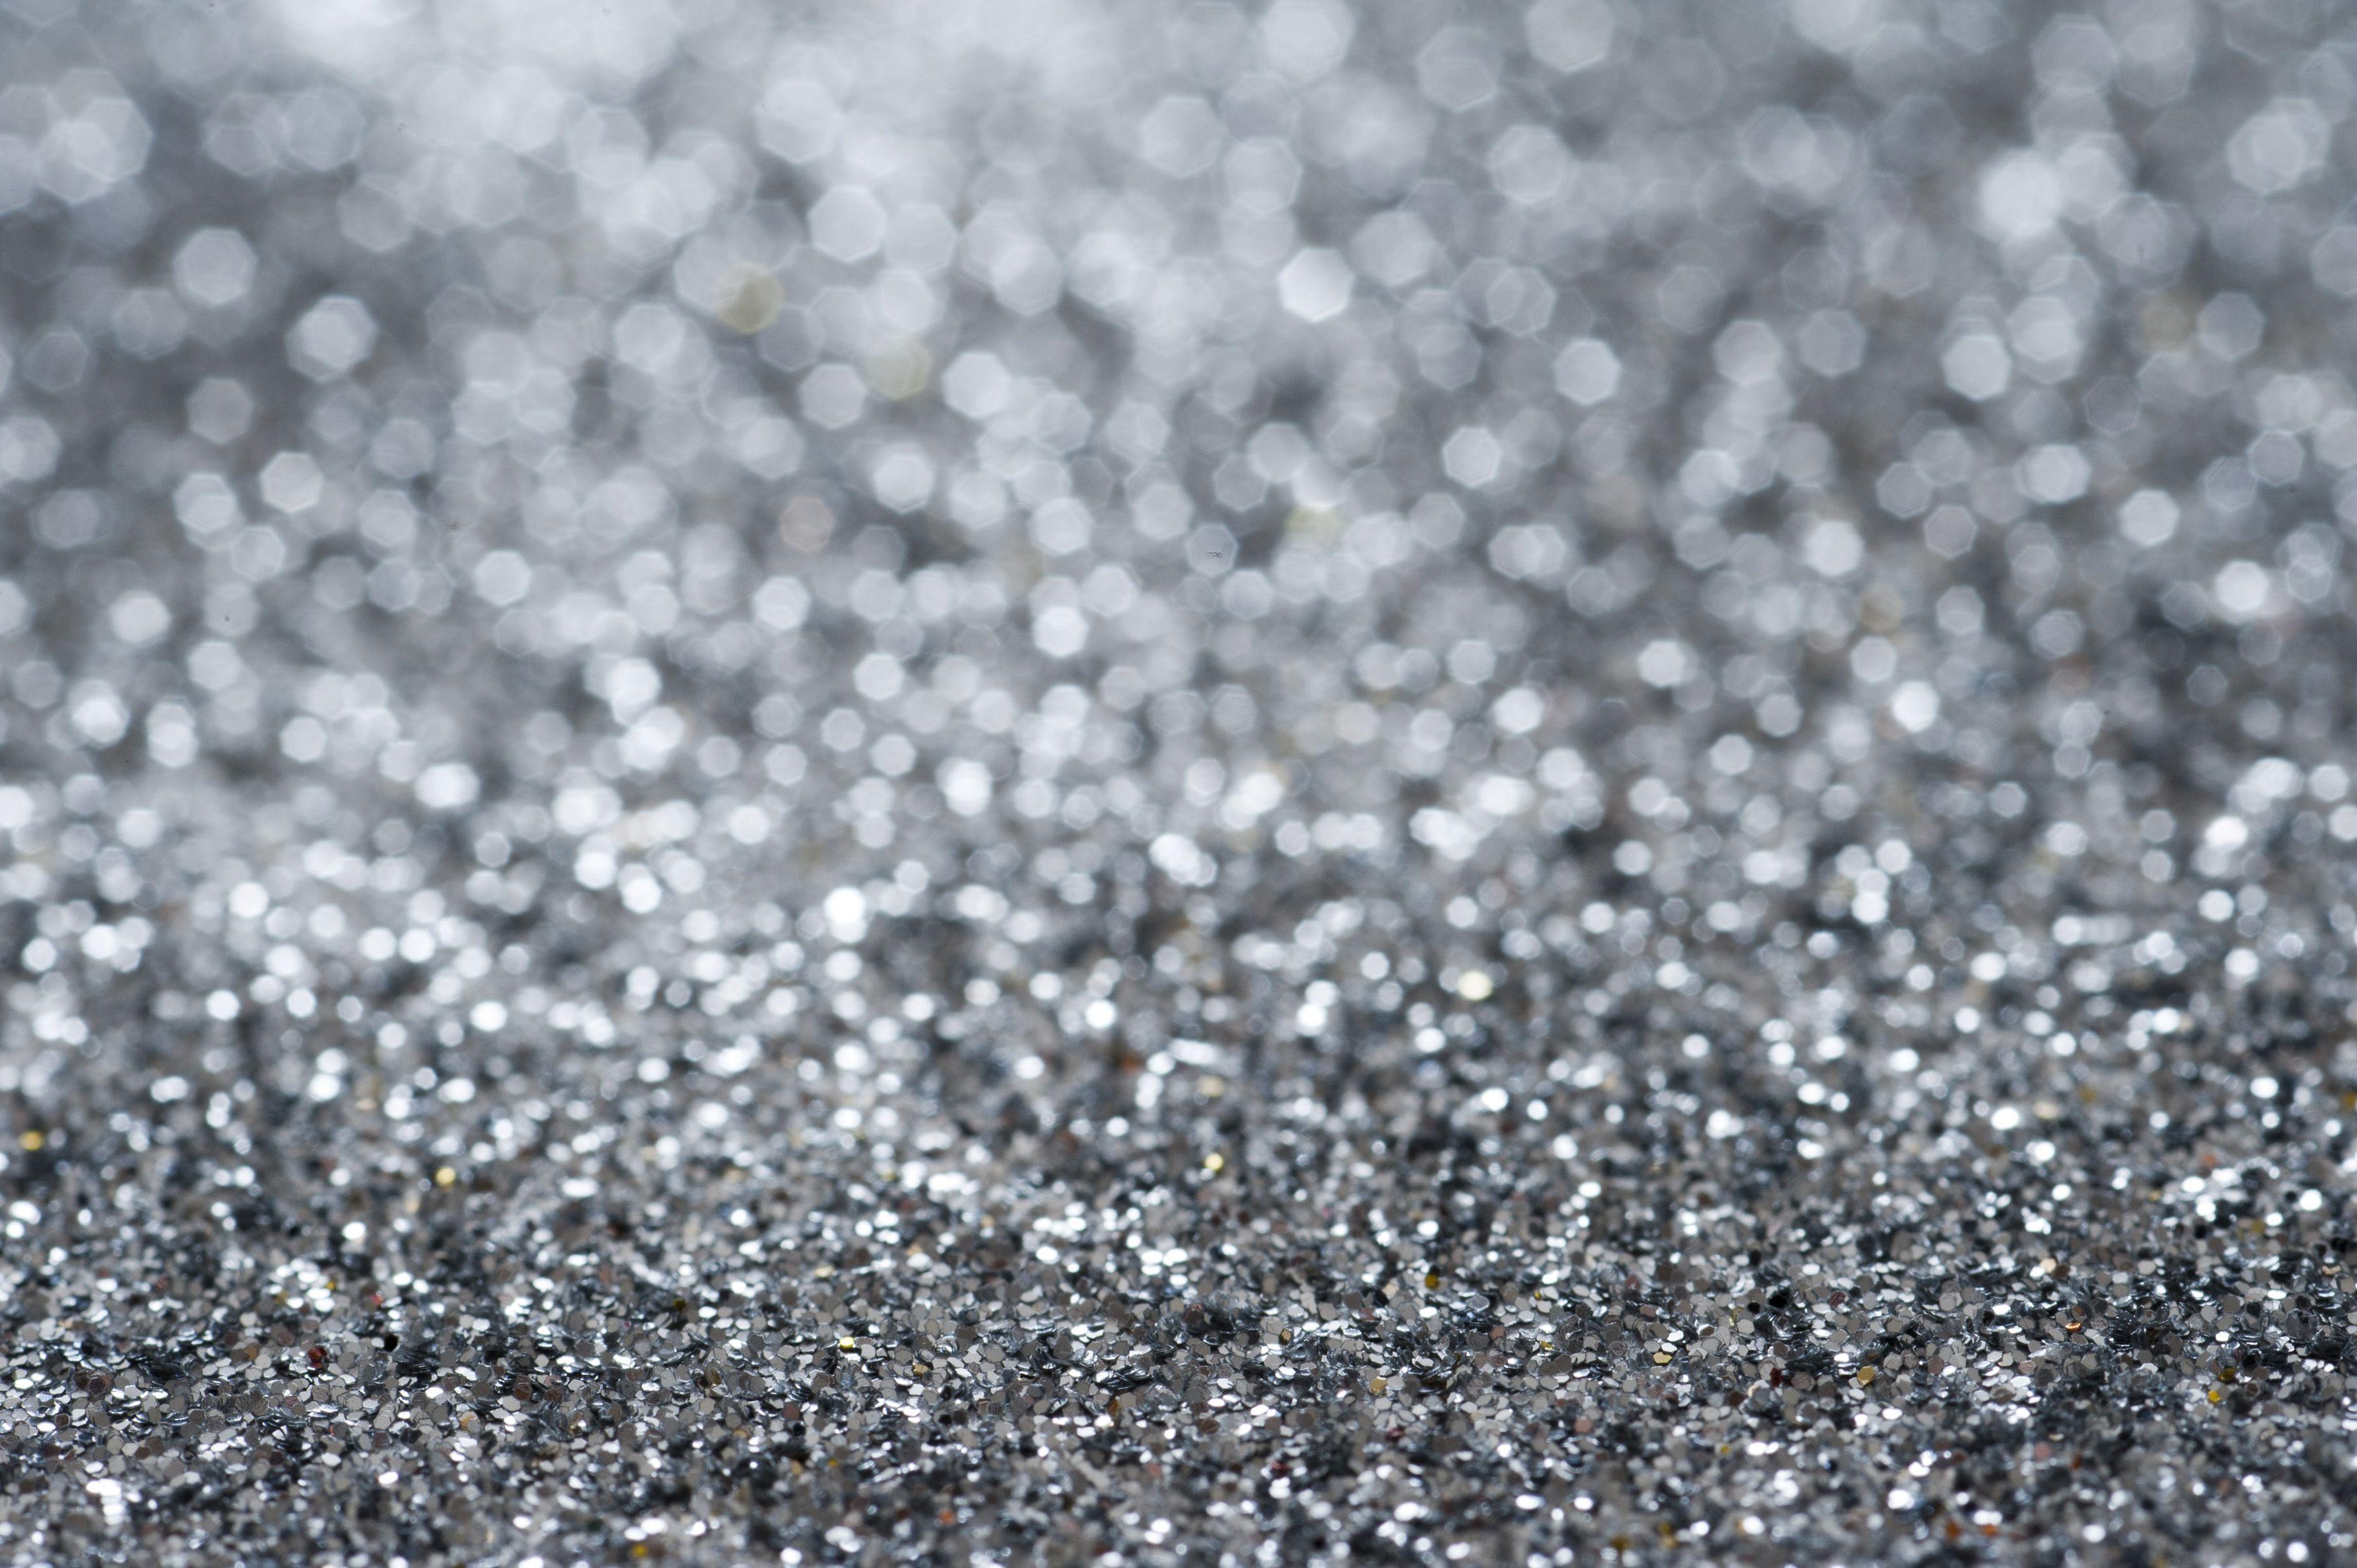 Silver Glitter Backgrounds Wallpaper Cave